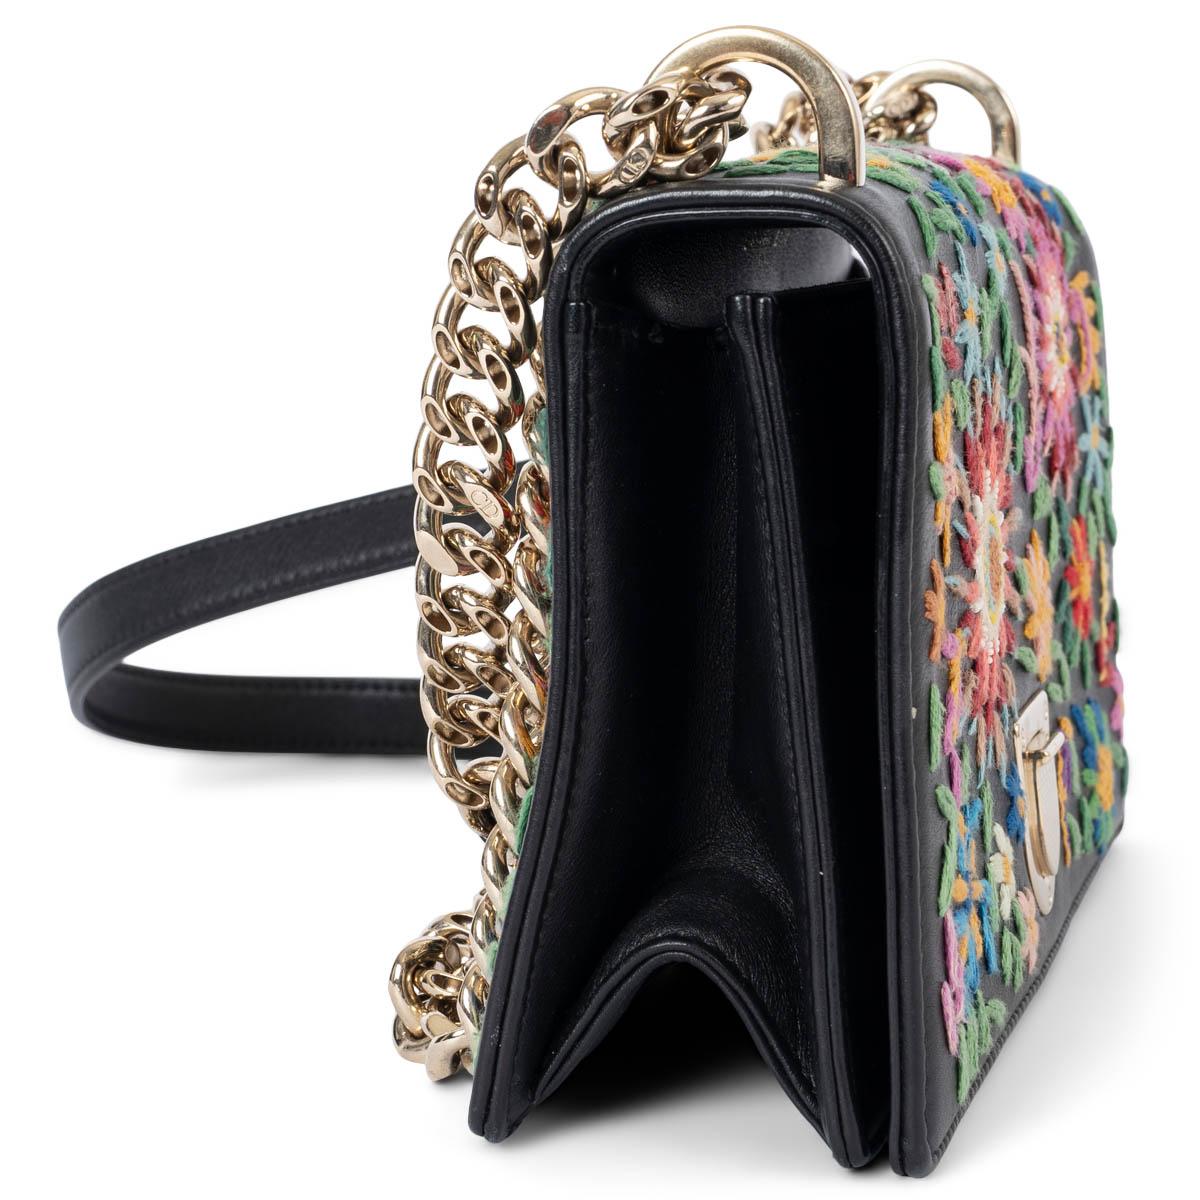 100% authentic Christian Dior Diorama Small flap shoulder bag in leather with mutlicolor floral embroidery. Features a gold-tone hardware and adjustable chain strap. Opens with a push lock on the front and is lined in fabric with an open pocket